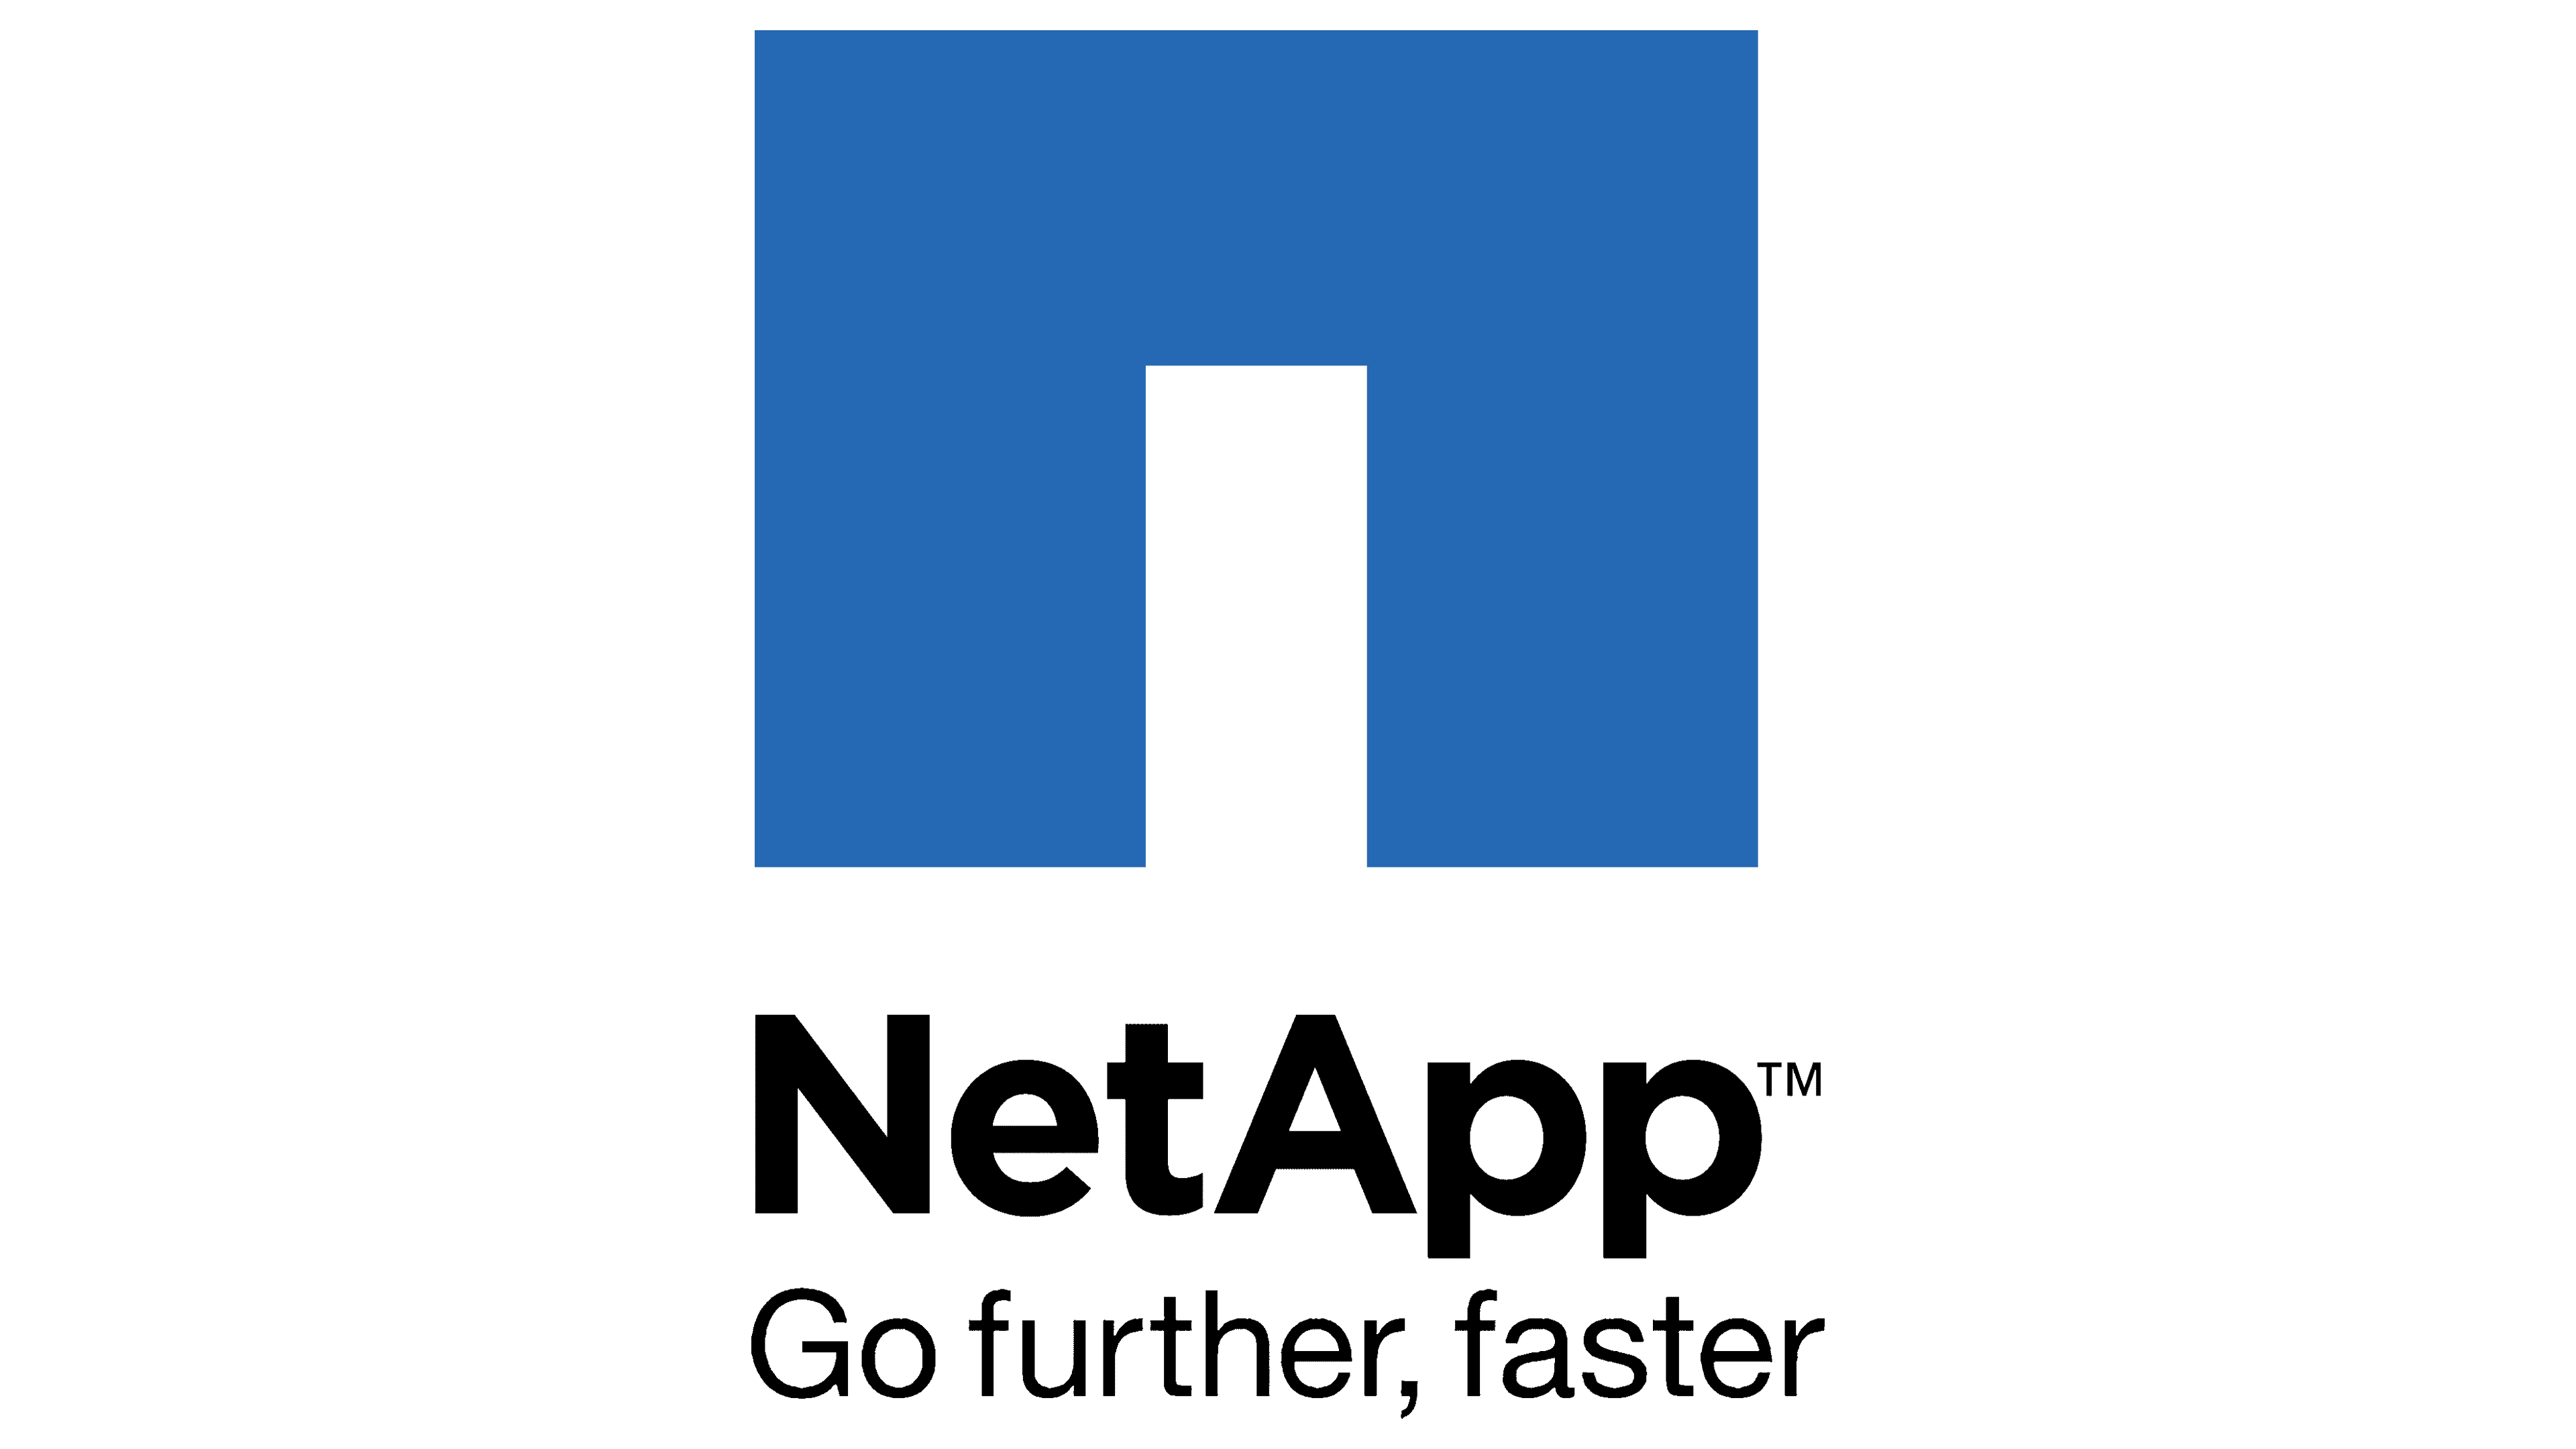 These Analysts Slash Price Targets On NetApp Following Q2 Results